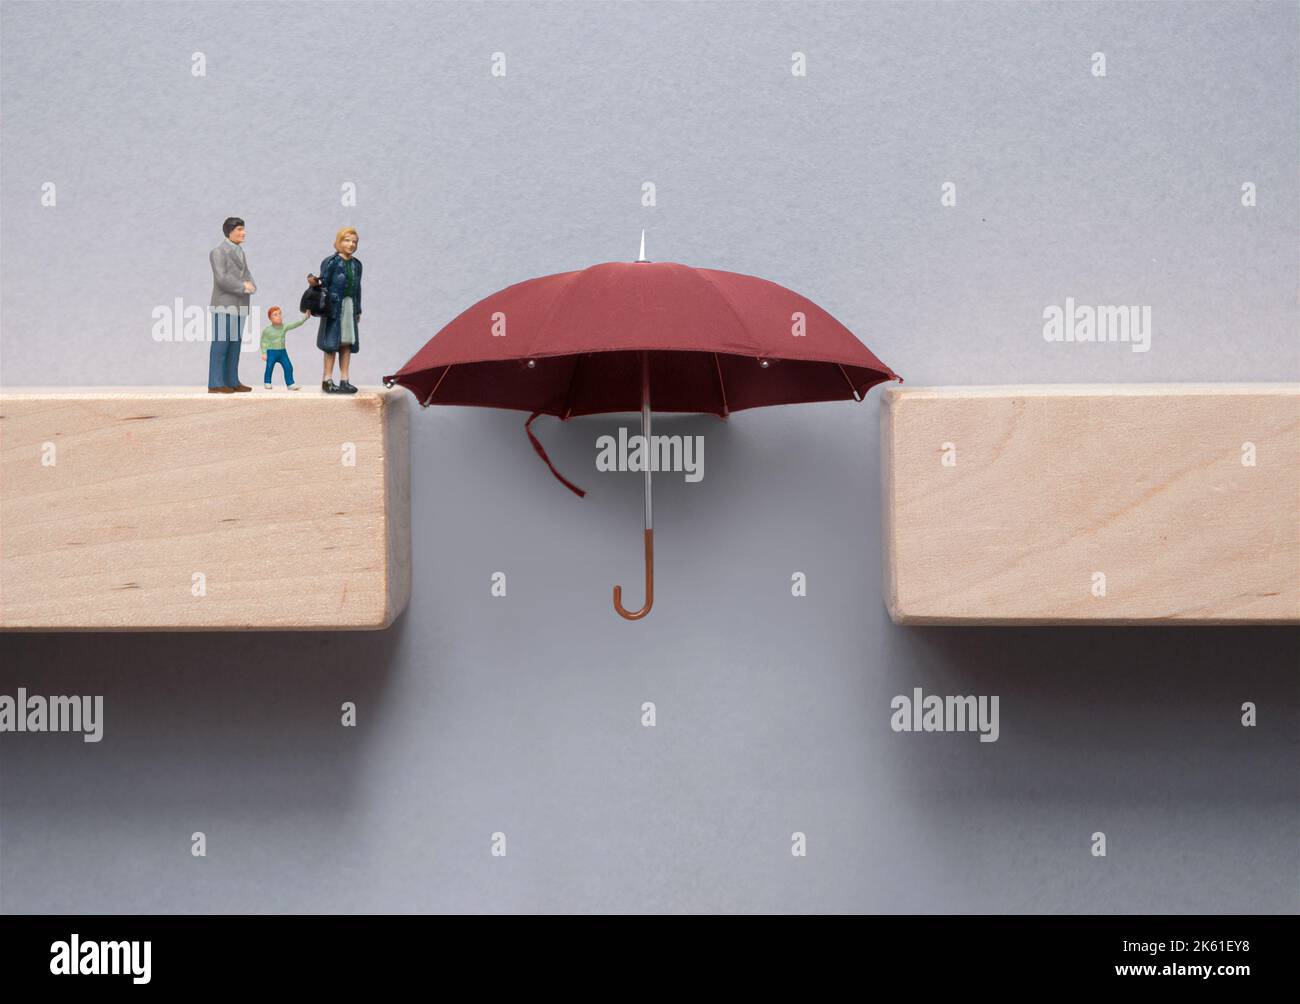 Family insurance concept; umbrella bridging the gap between wooden blocks and safe crossing for family Stock Photo